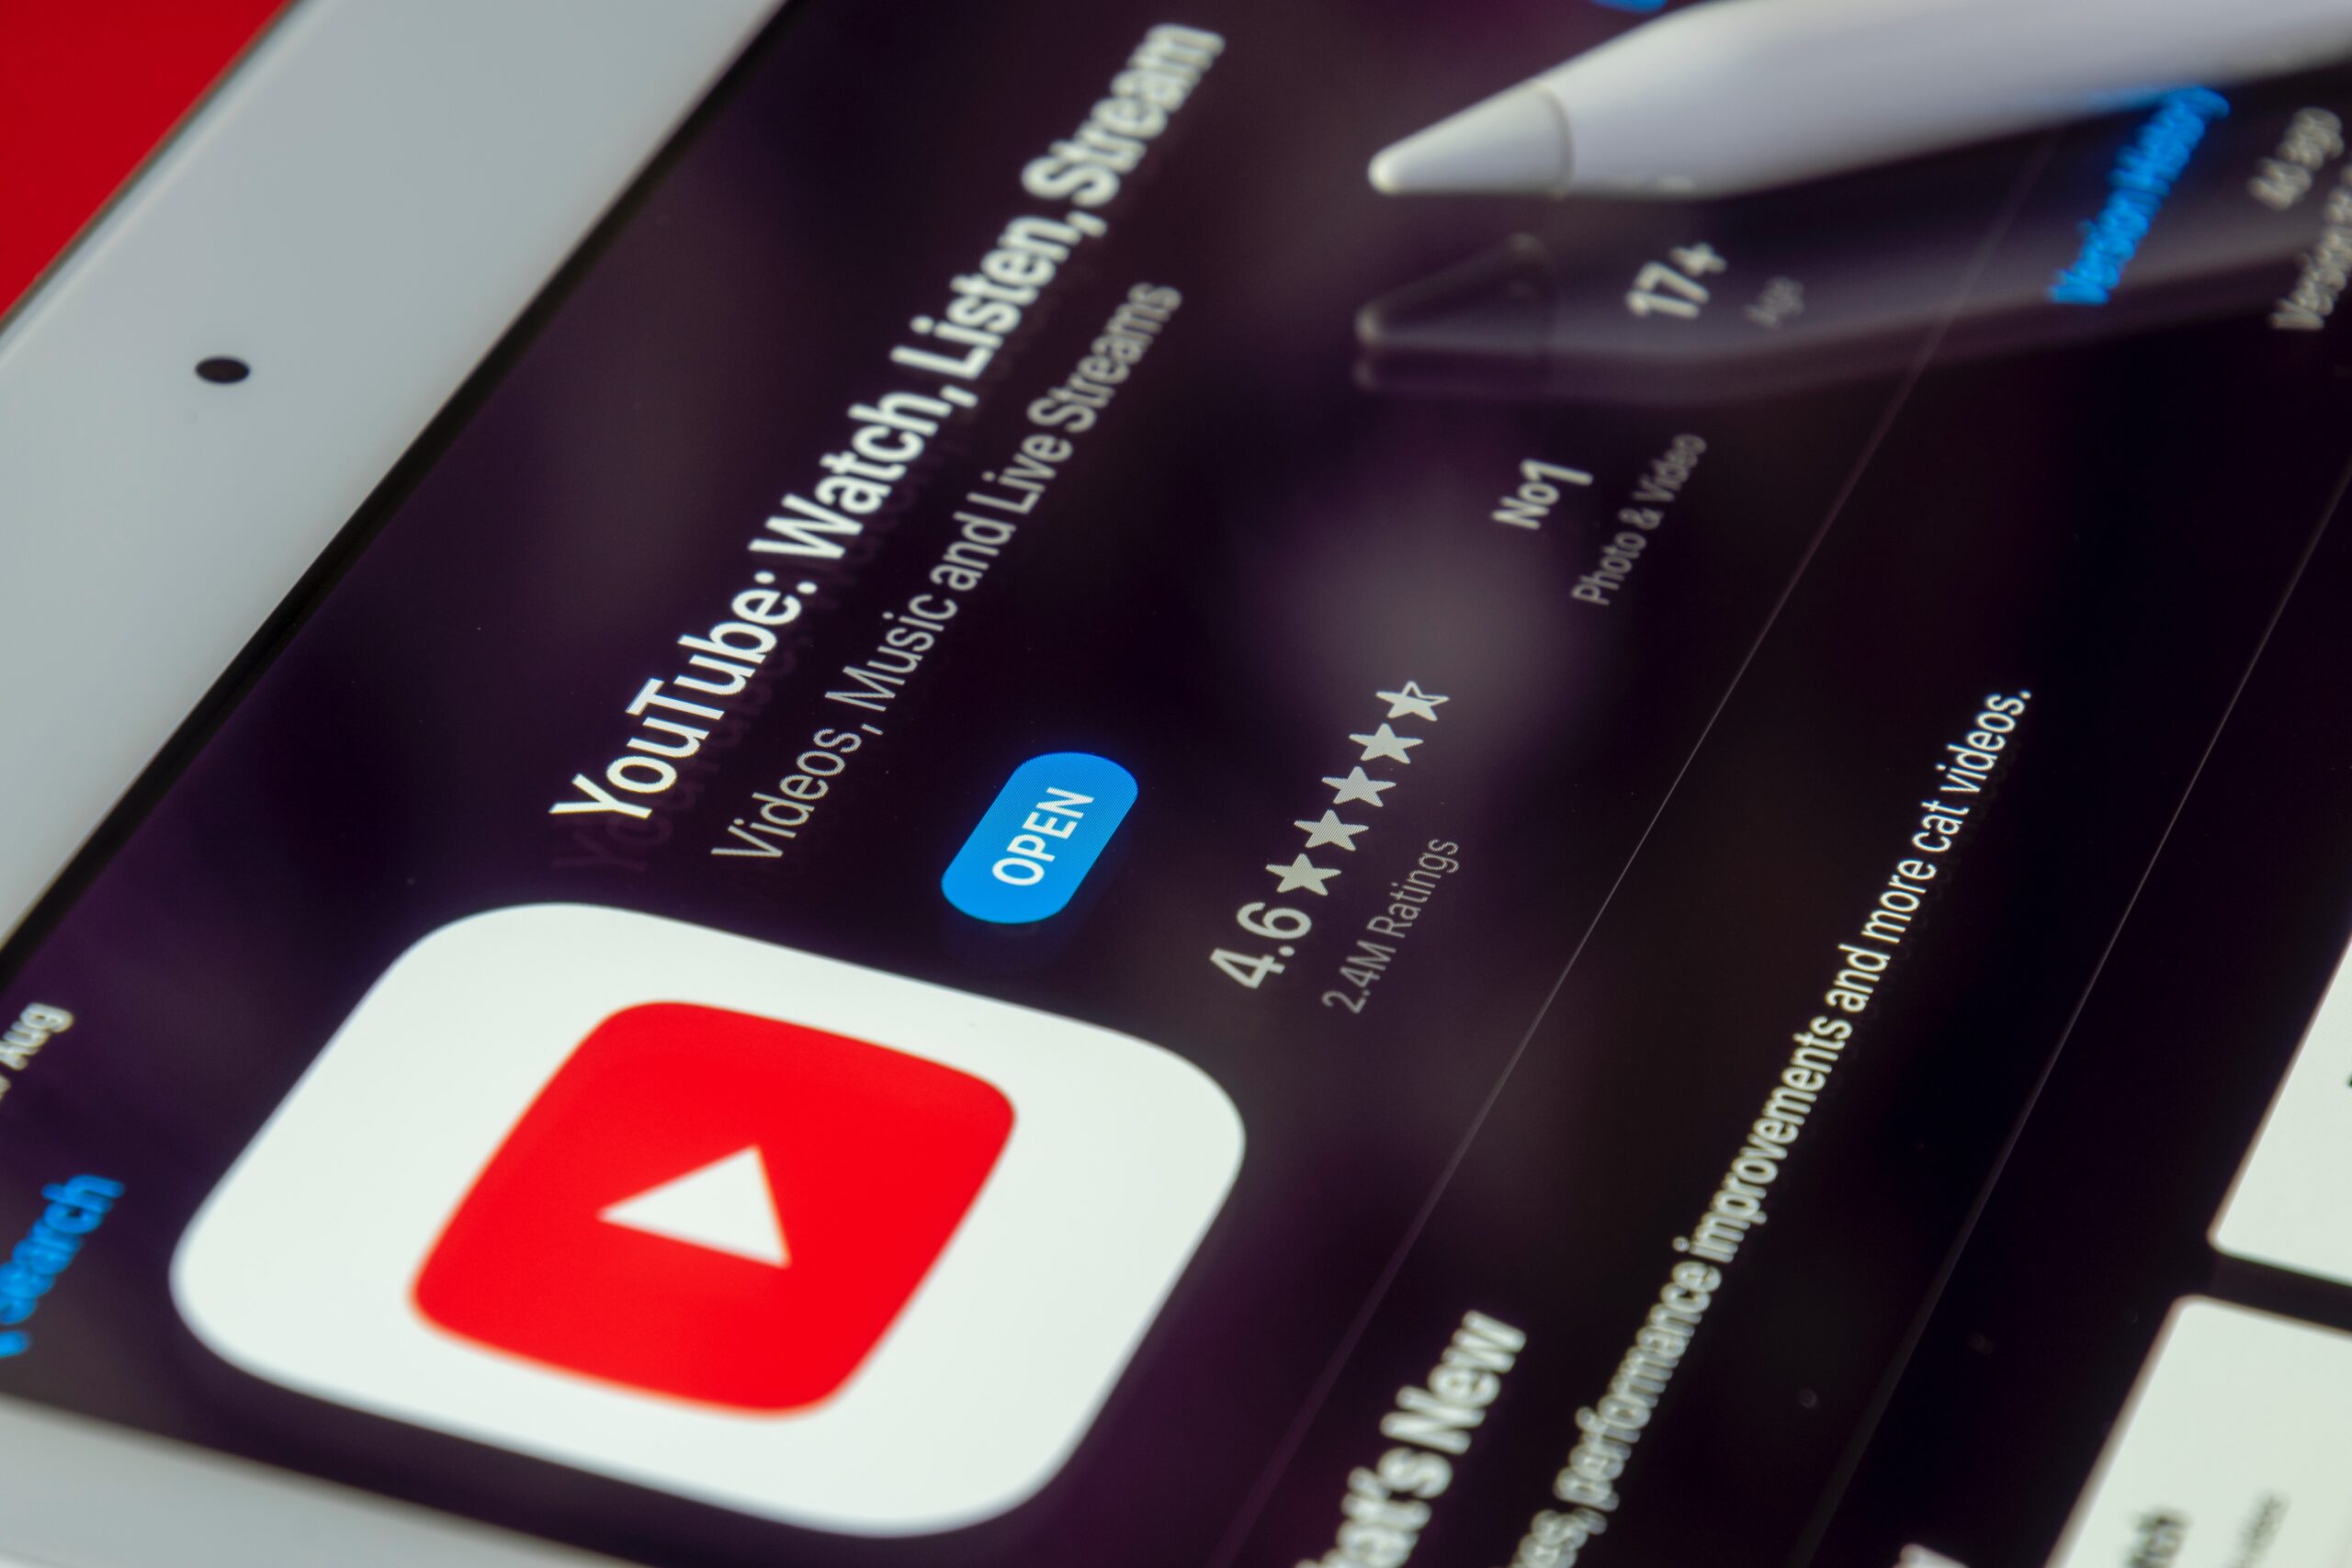 Youtube unveils major updates including multiple new features